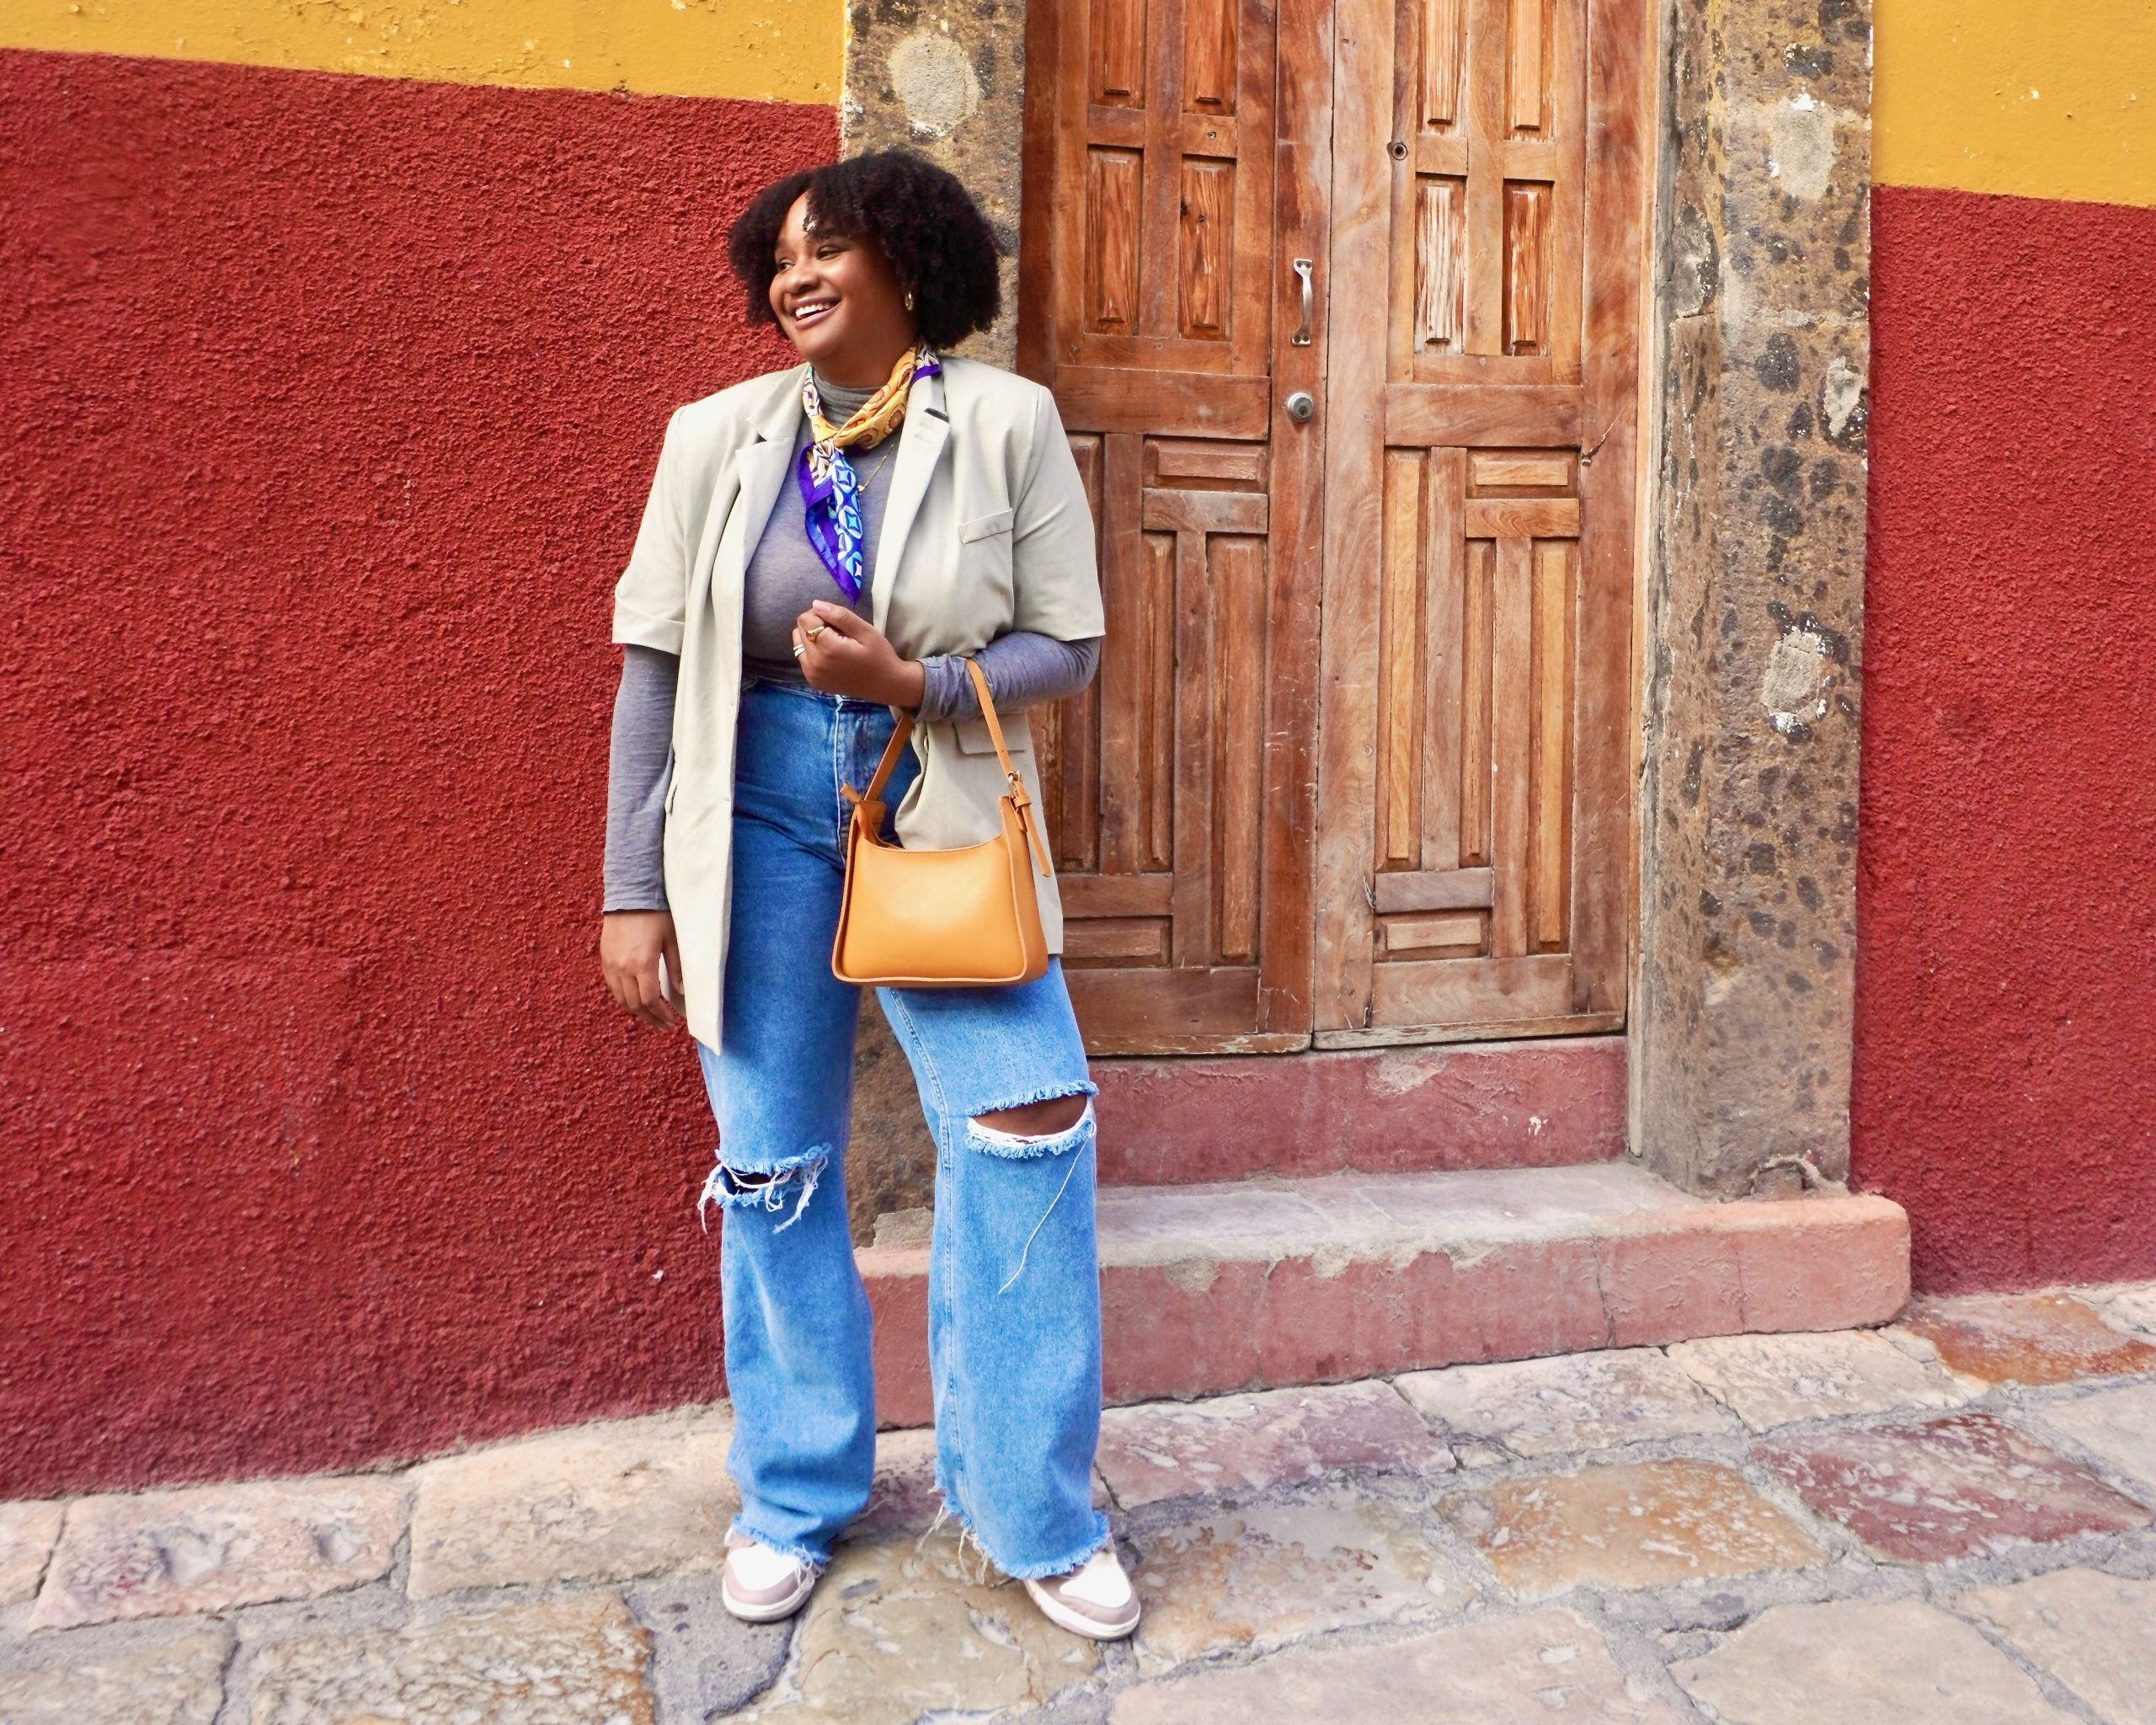 ‘I Got Your Black’ Is Exposing Travelers To All Things Afro-Indigenous In Mexico